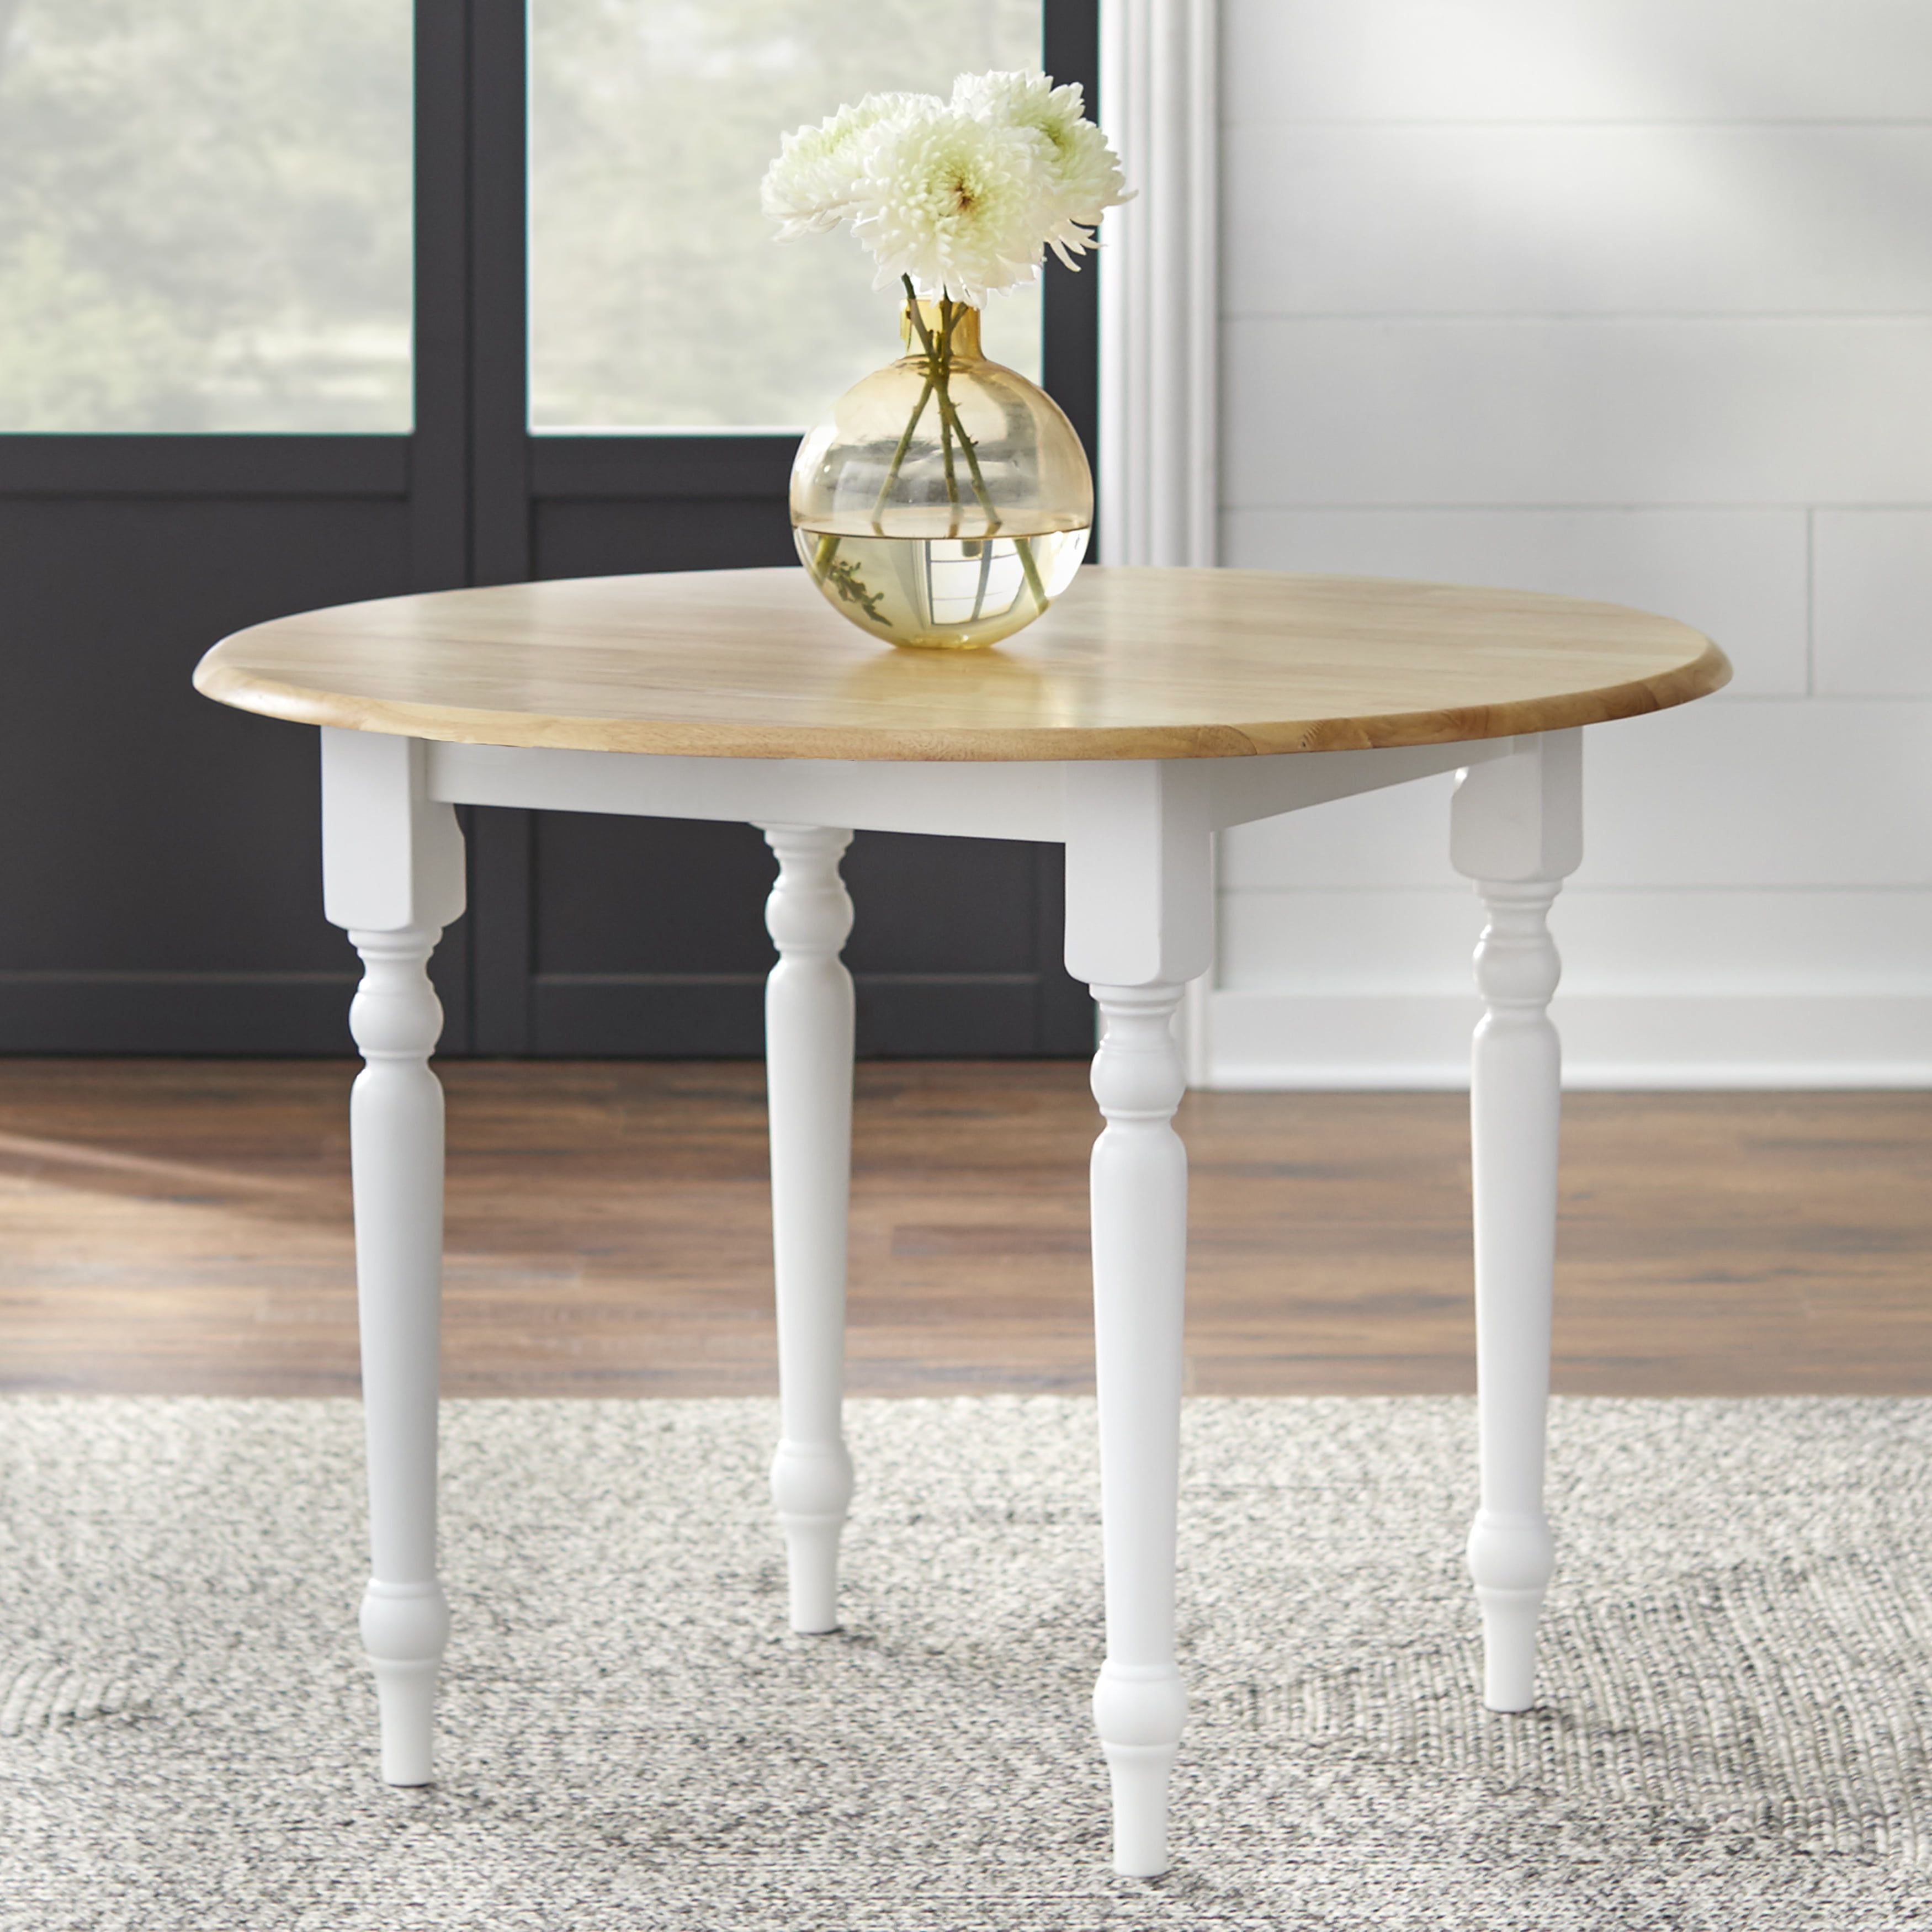 Tms Round Drop Leaf Dining Table White, Round Drop Leaf Dining Table And Chairs